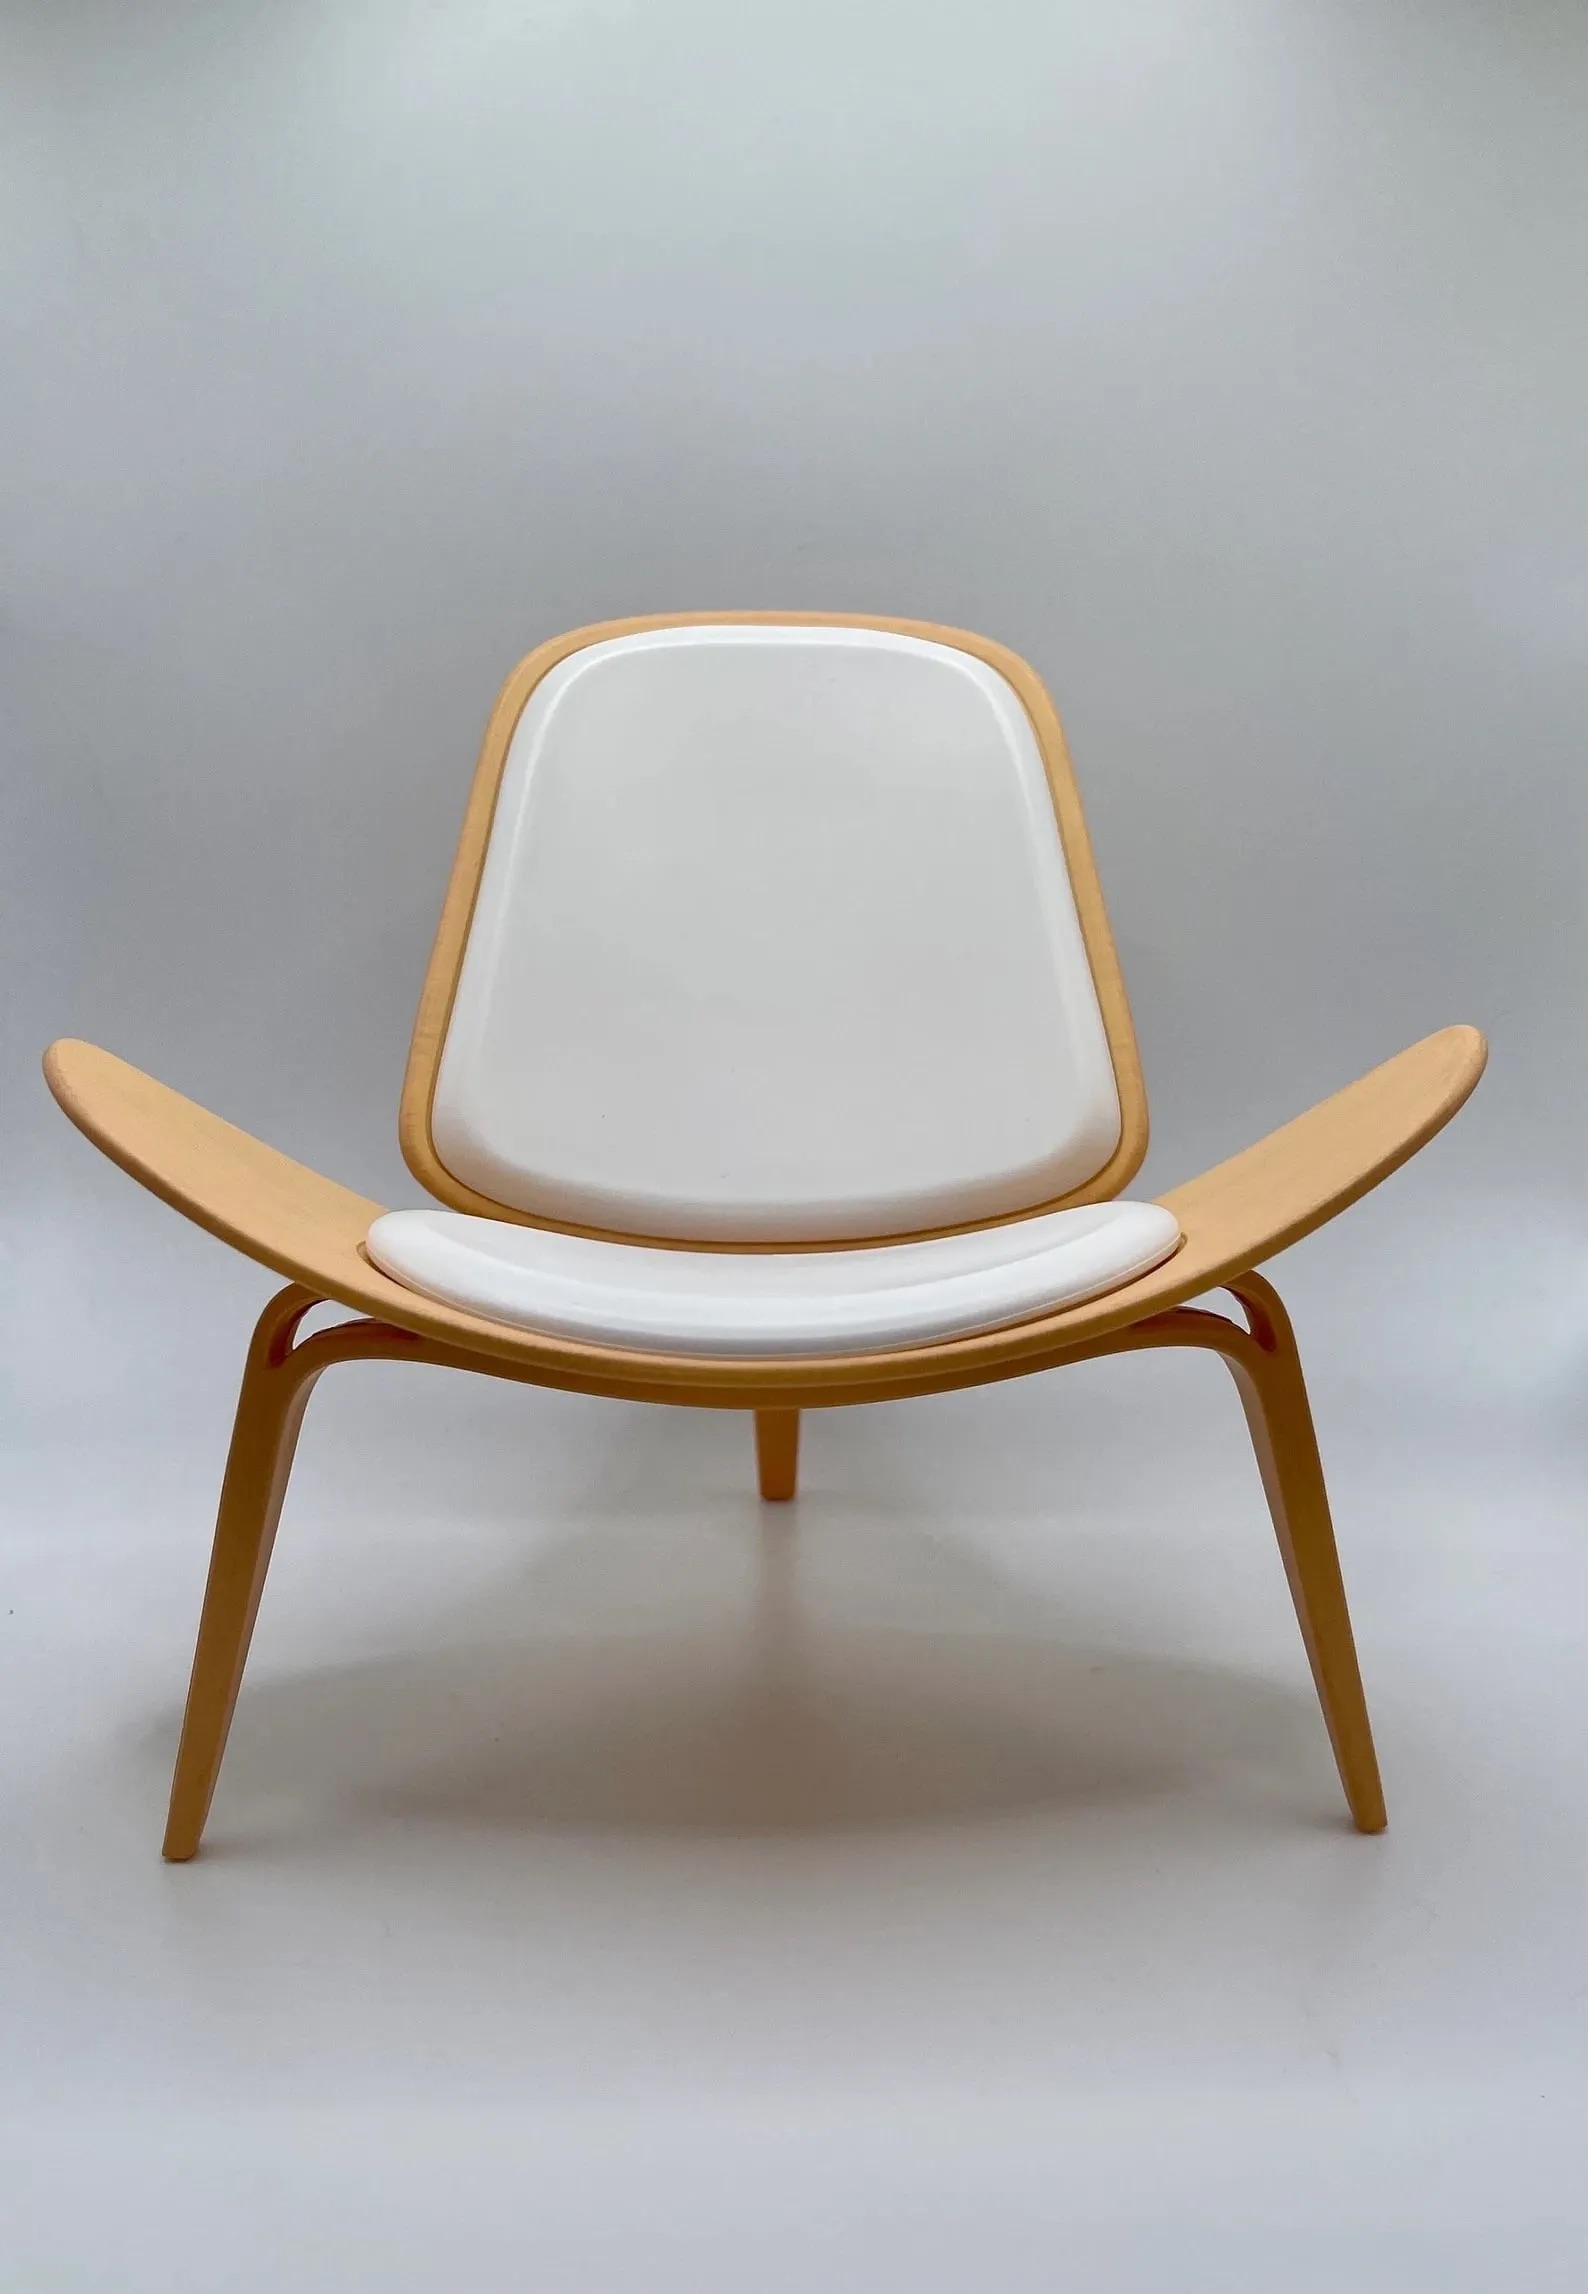 Three Hans Wegner Shell Chairs, Scale Model Desk Displays - Image 3 of 8